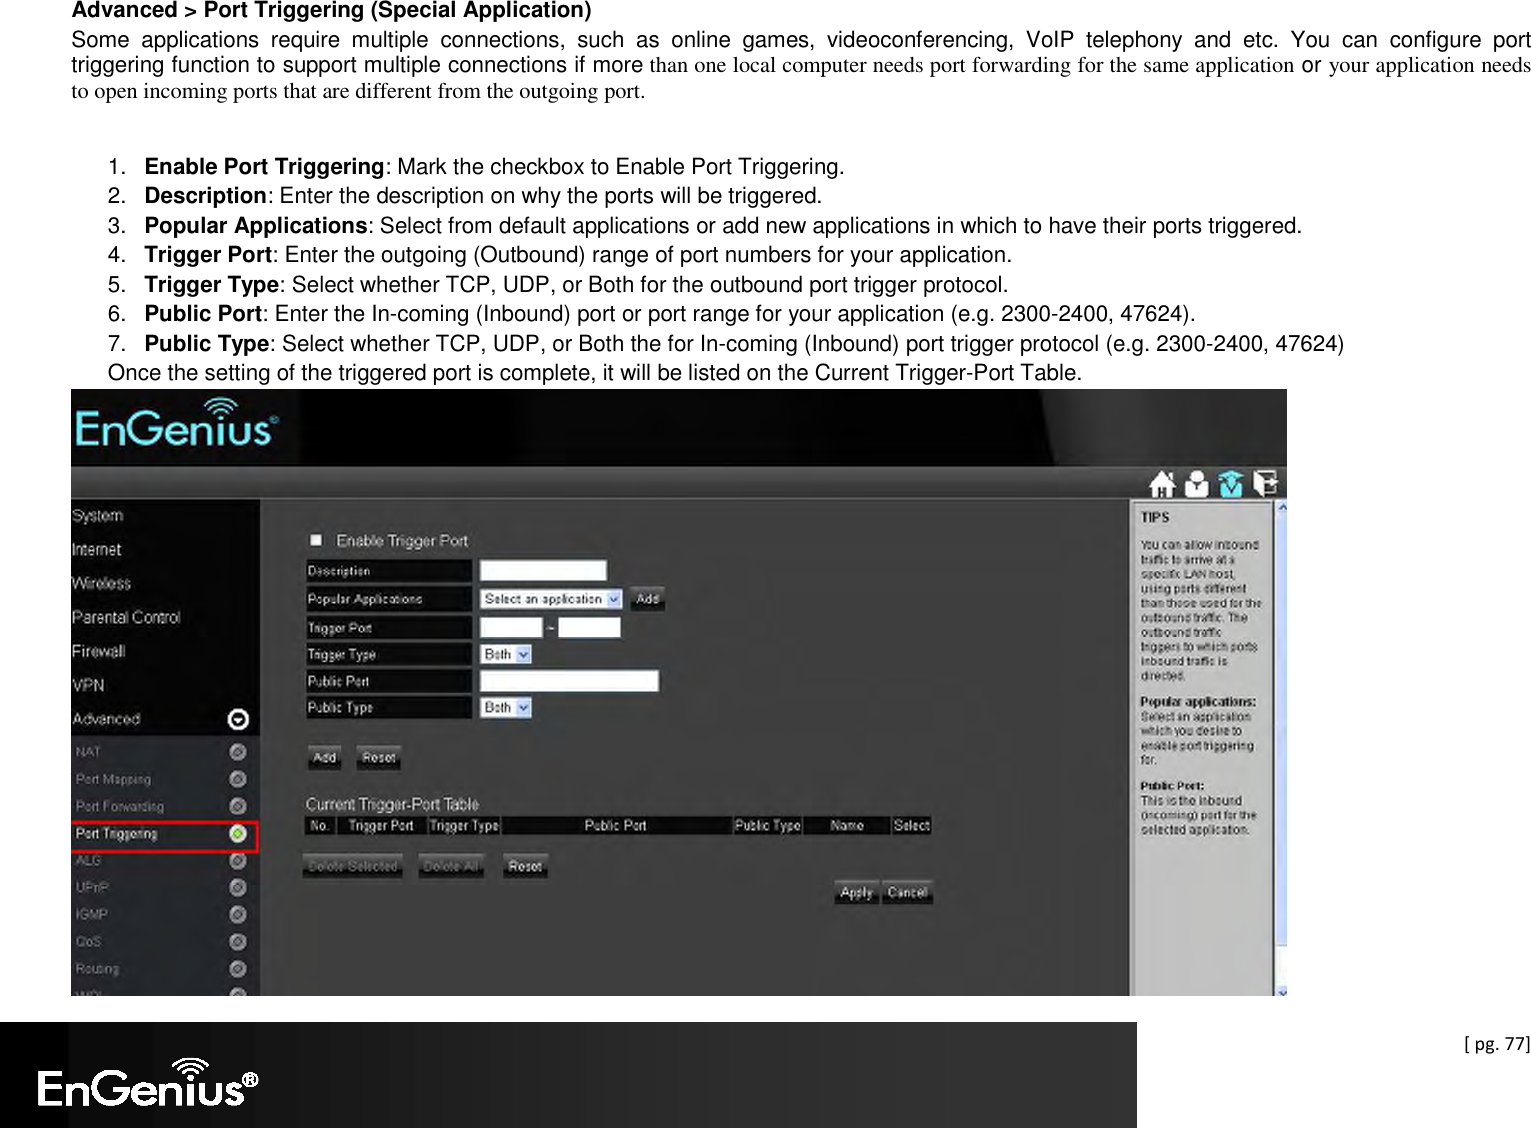  [ pg. 77] Advanced &gt; Port Triggering (Special Application) Some  applications  require  multiple  connections,  such  as  online  games,  videoconferencing,  VoIP  telephony  and  etc.  You  can  configure  port triggering function to support multiple connections if more than one local computer needs port forwarding for the same application or your application needs to open incoming ports that are different from the outgoing port.  1.  Enable Port Triggering: Mark the checkbox to Enable Port Triggering. 2.  Description: Enter the description on why the ports will be triggered. 3.  Popular Applications: Select from default applications or add new applications in which to have their ports triggered. 4.  Trigger Port: Enter the outgoing (Outbound) range of port numbers for your application. 5.  Trigger Type: Select whether TCP, UDP, or Both for the outbound port trigger protocol. 6.  Public Port: Enter the In-coming (Inbound) port or port range for your application (e.g. 2300-2400, 47624). 7.  Public Type: Select whether TCP, UDP, or Both the for In-coming (Inbound) port trigger protocol (e.g. 2300-2400, 47624) Once the setting of the triggered port is complete, it will be listed on the Current Trigger-Port Table.   